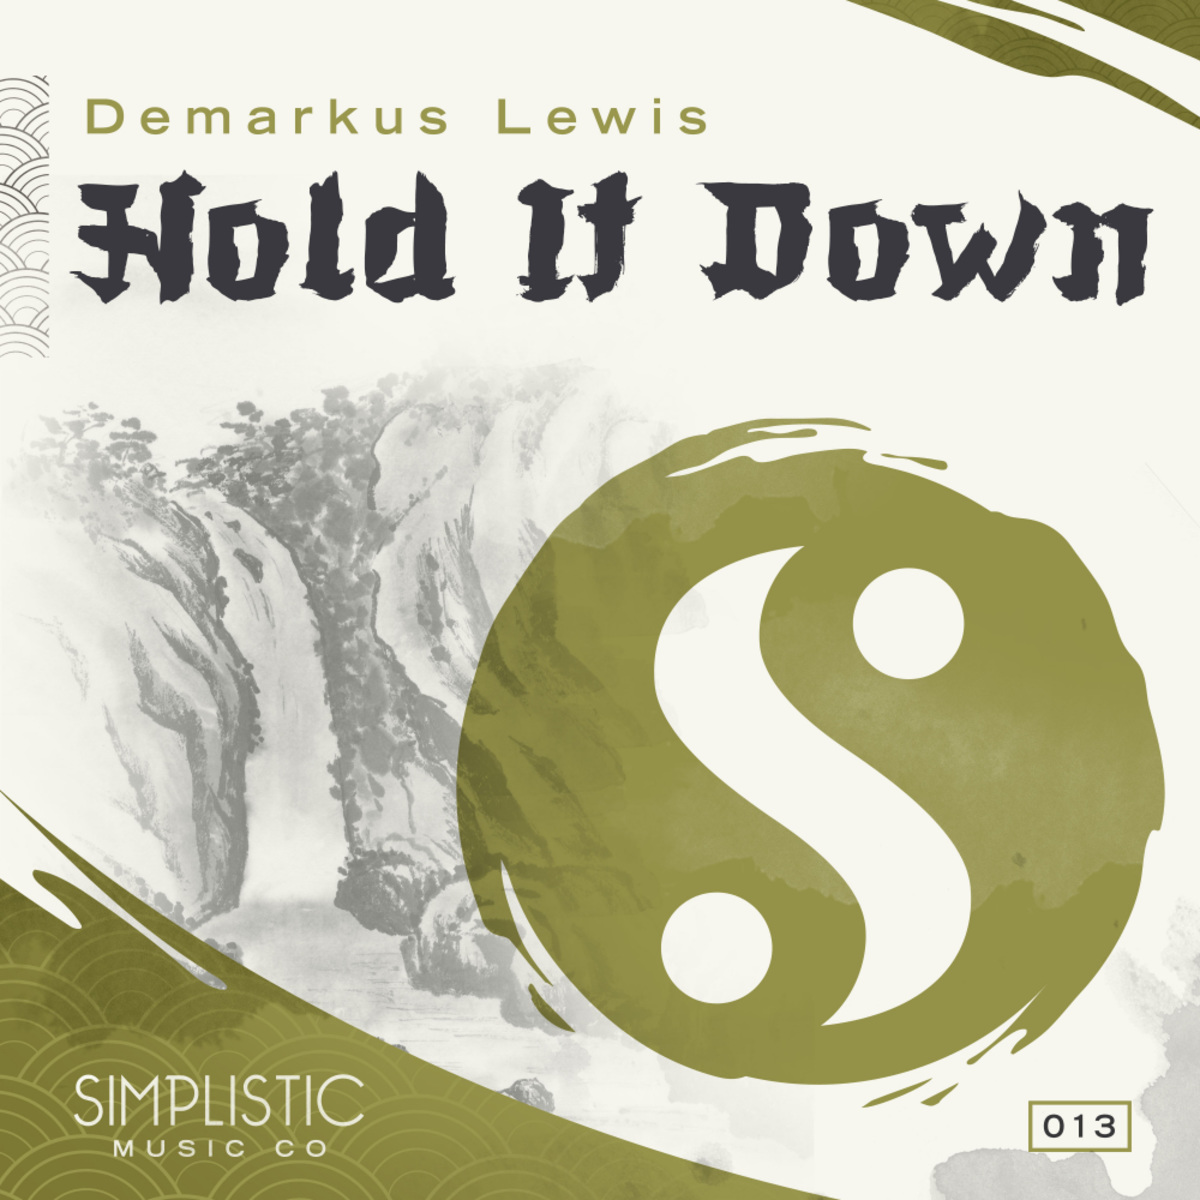 Demarkus Lewis - Hold It Down / Simplistic Music Company